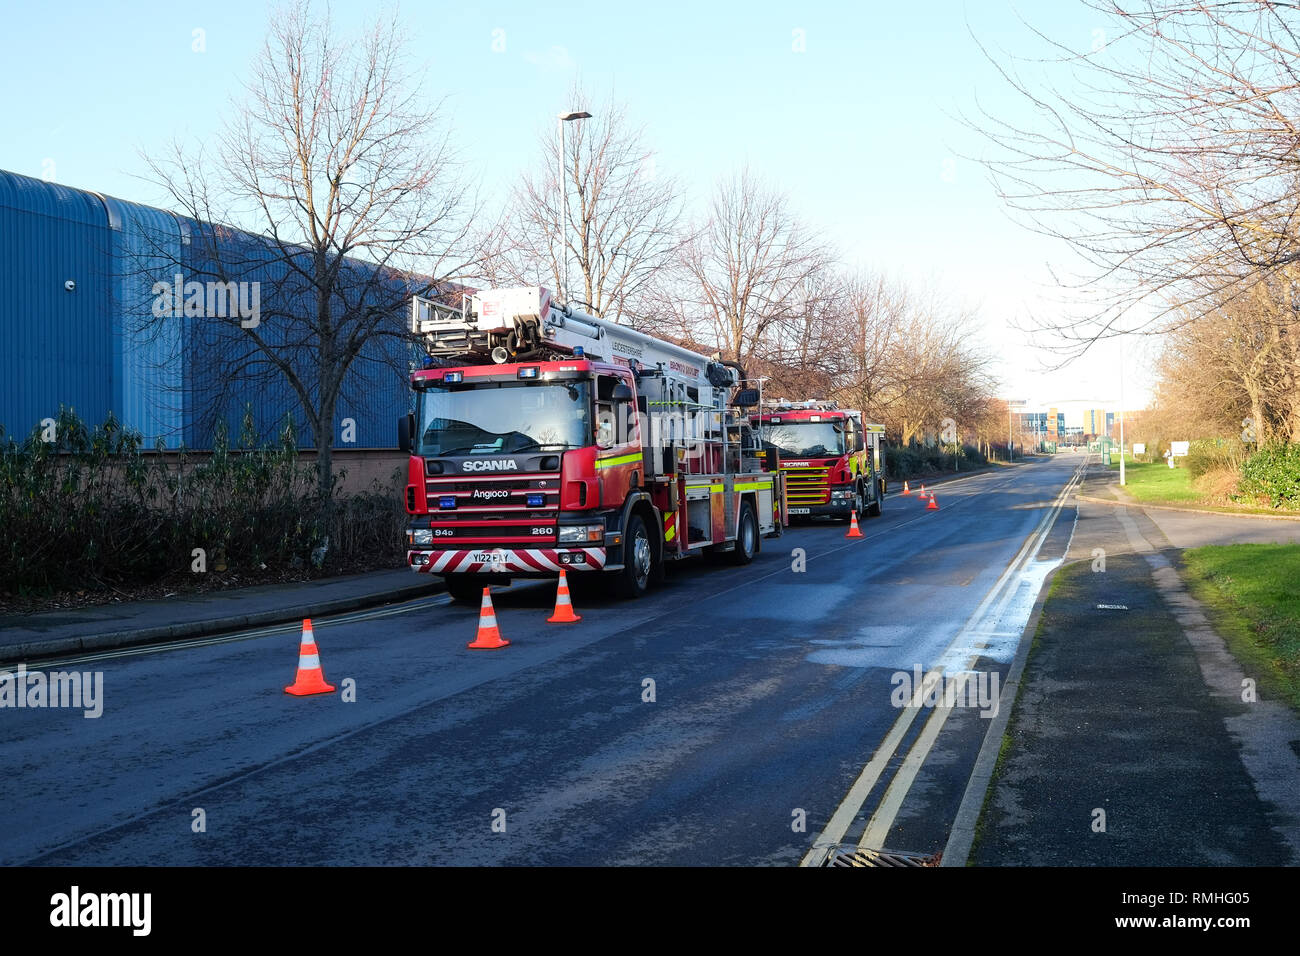 fire engines at a incident Stock Photo